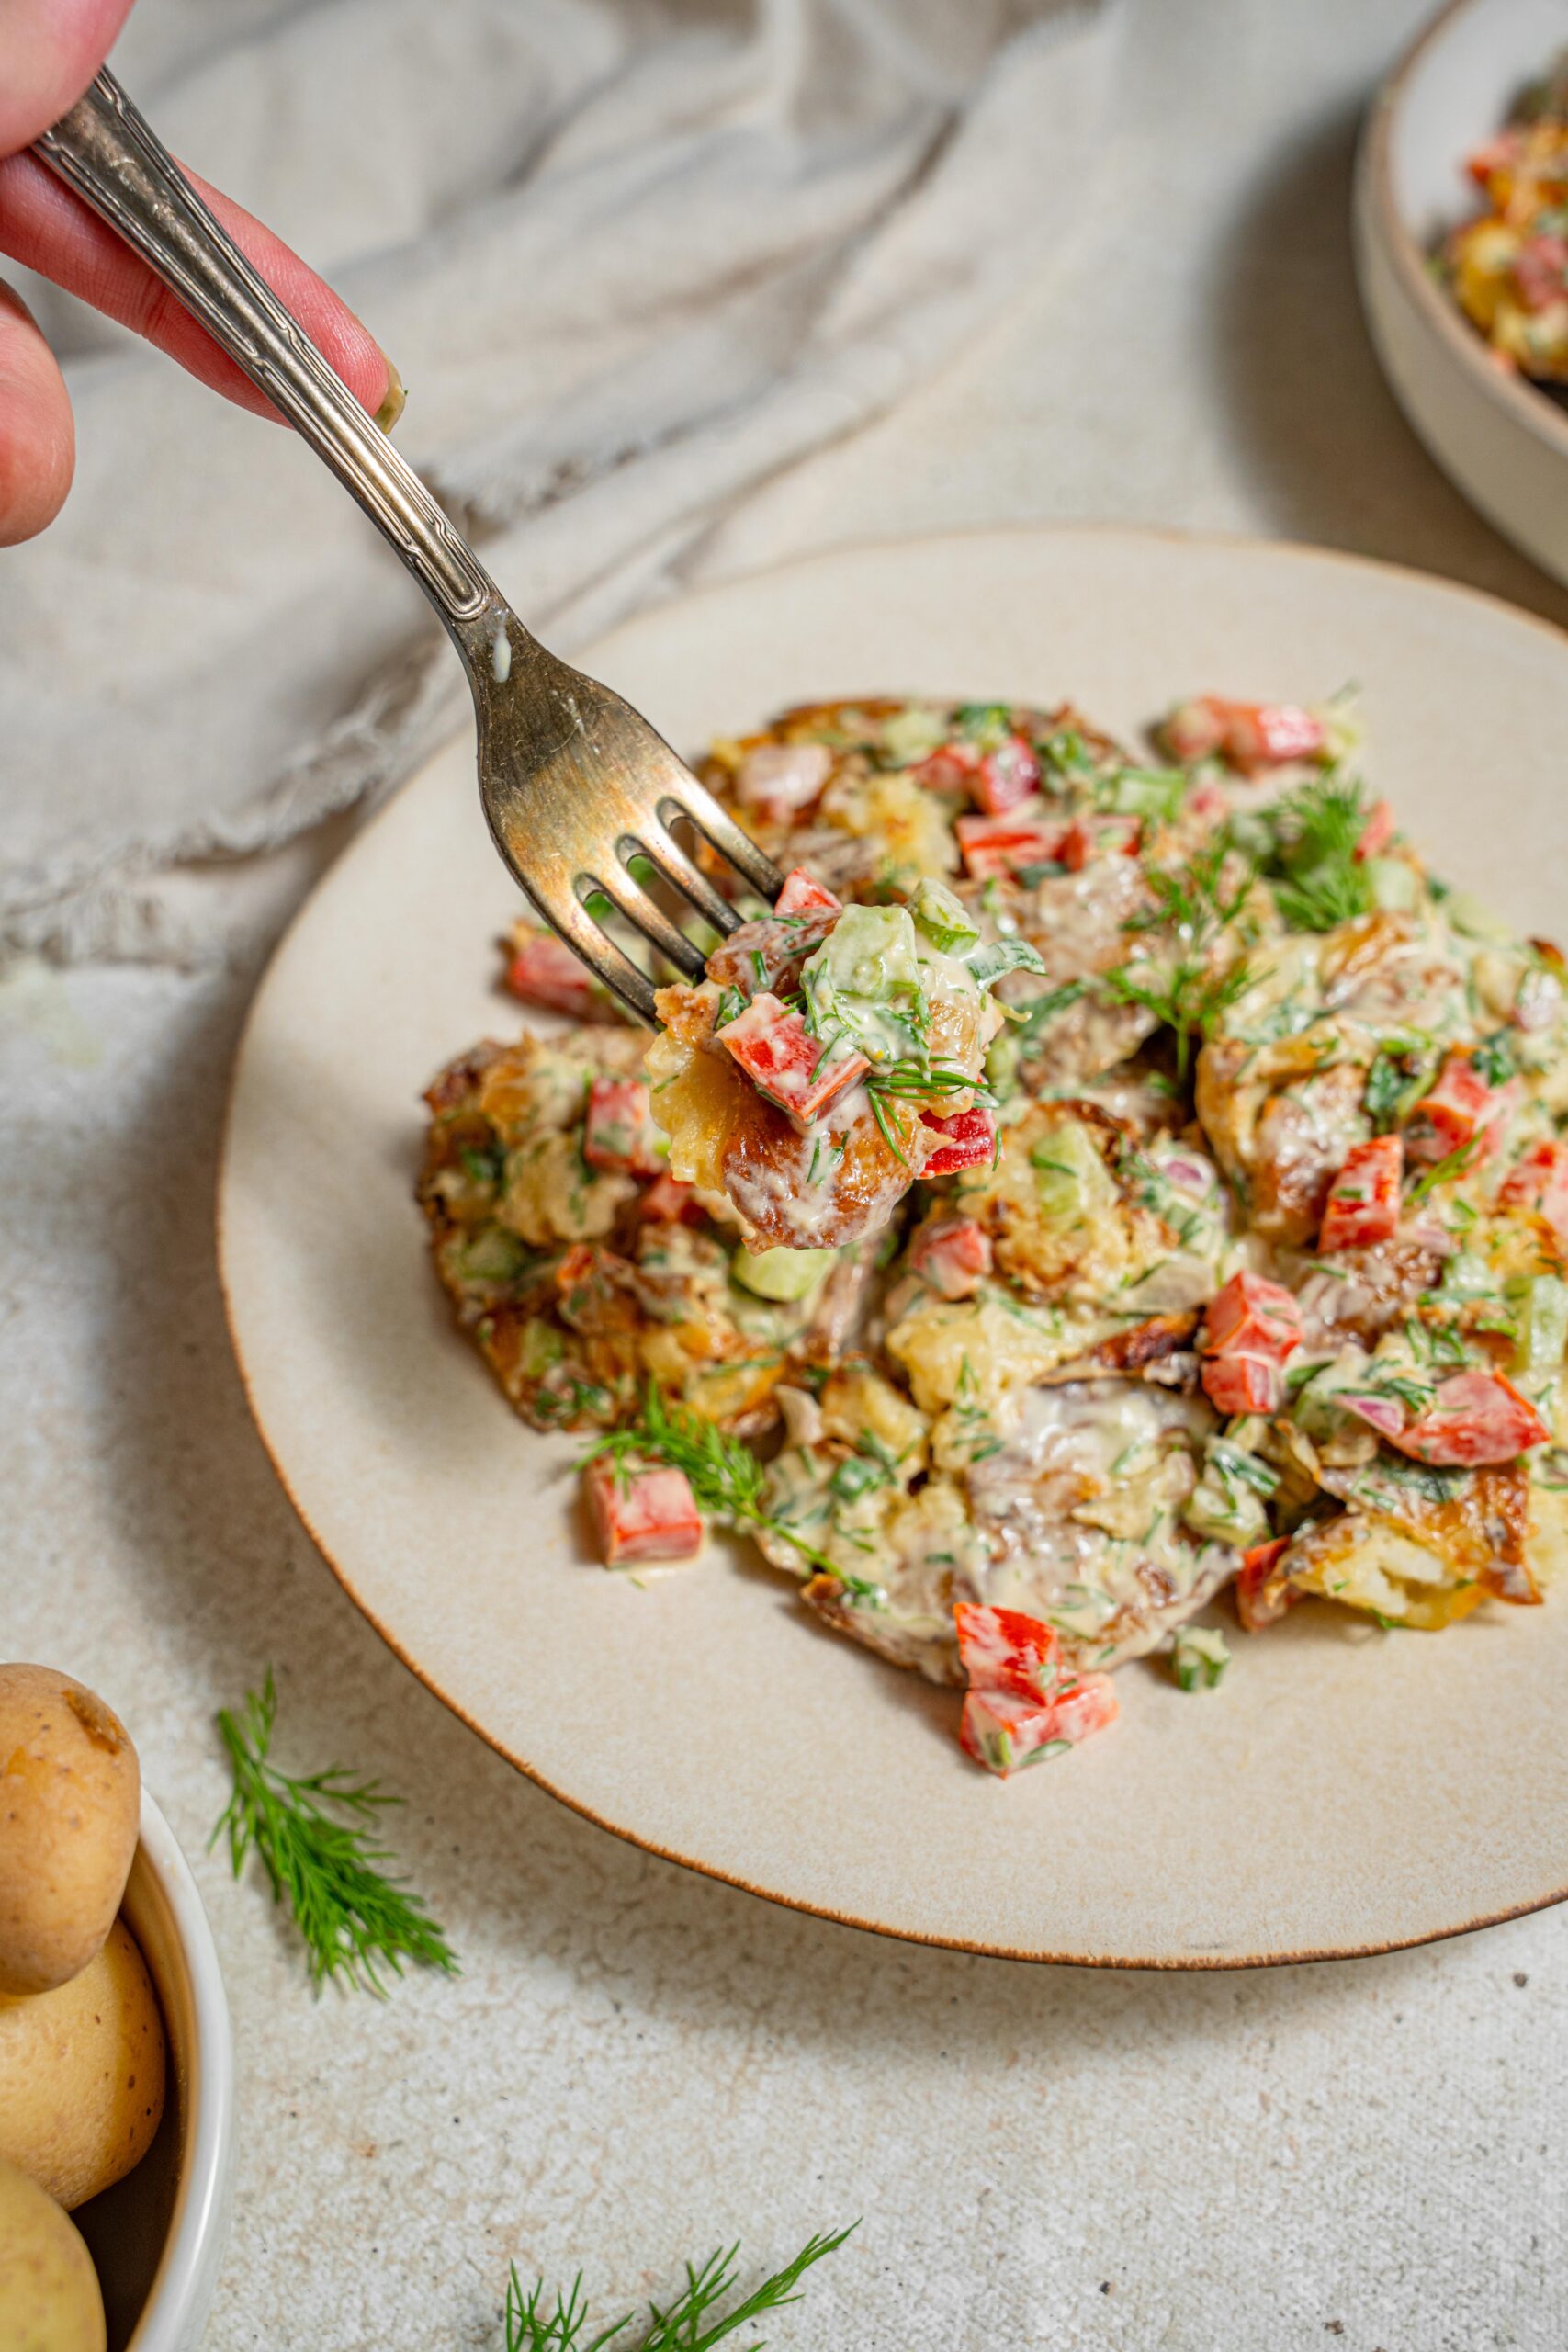 smashed potato salad picked up by a fork